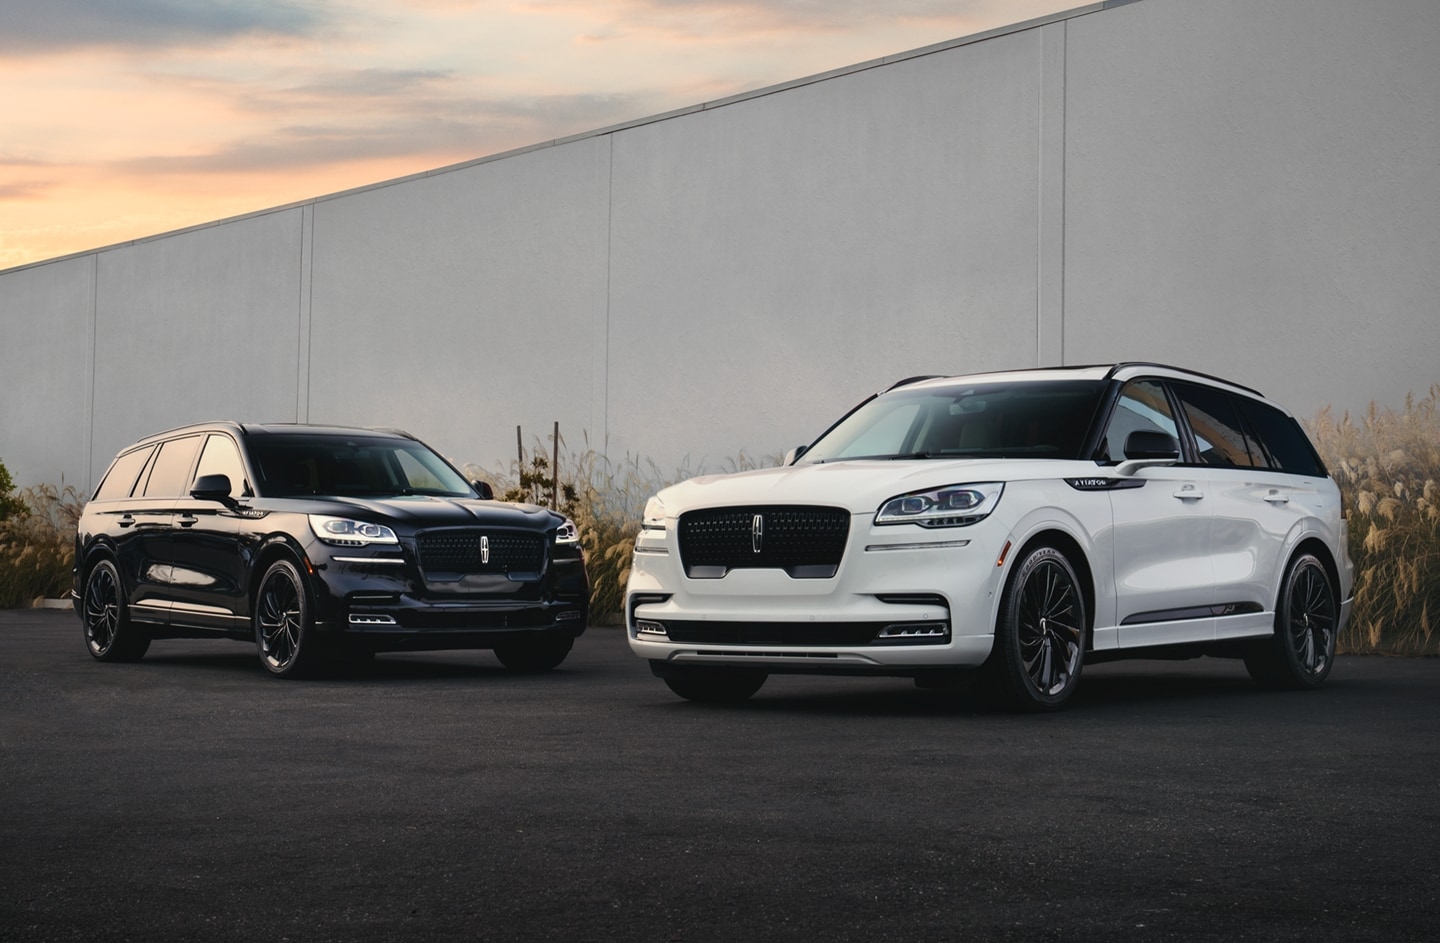 A Lineup of Lincoln Aviator Vehicles